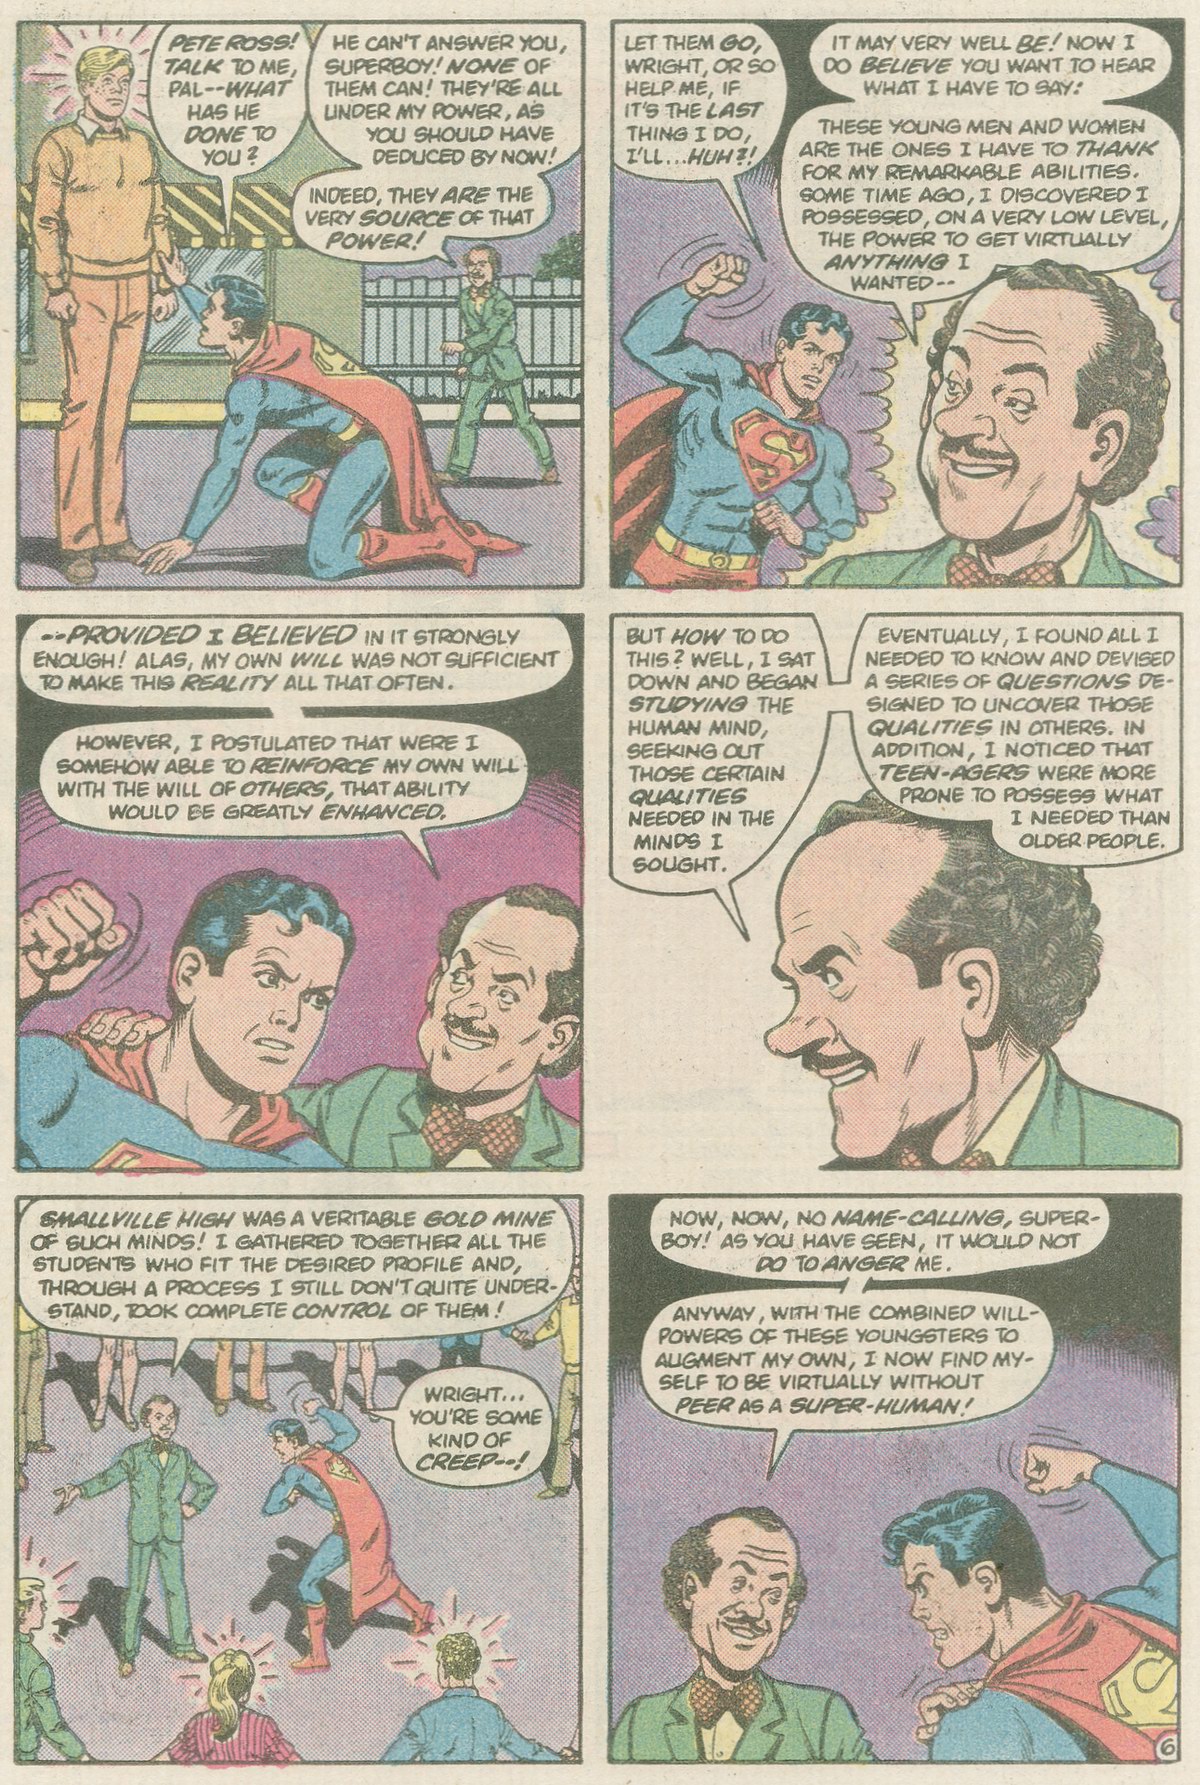 The New Adventures of Superboy 37 Page 6